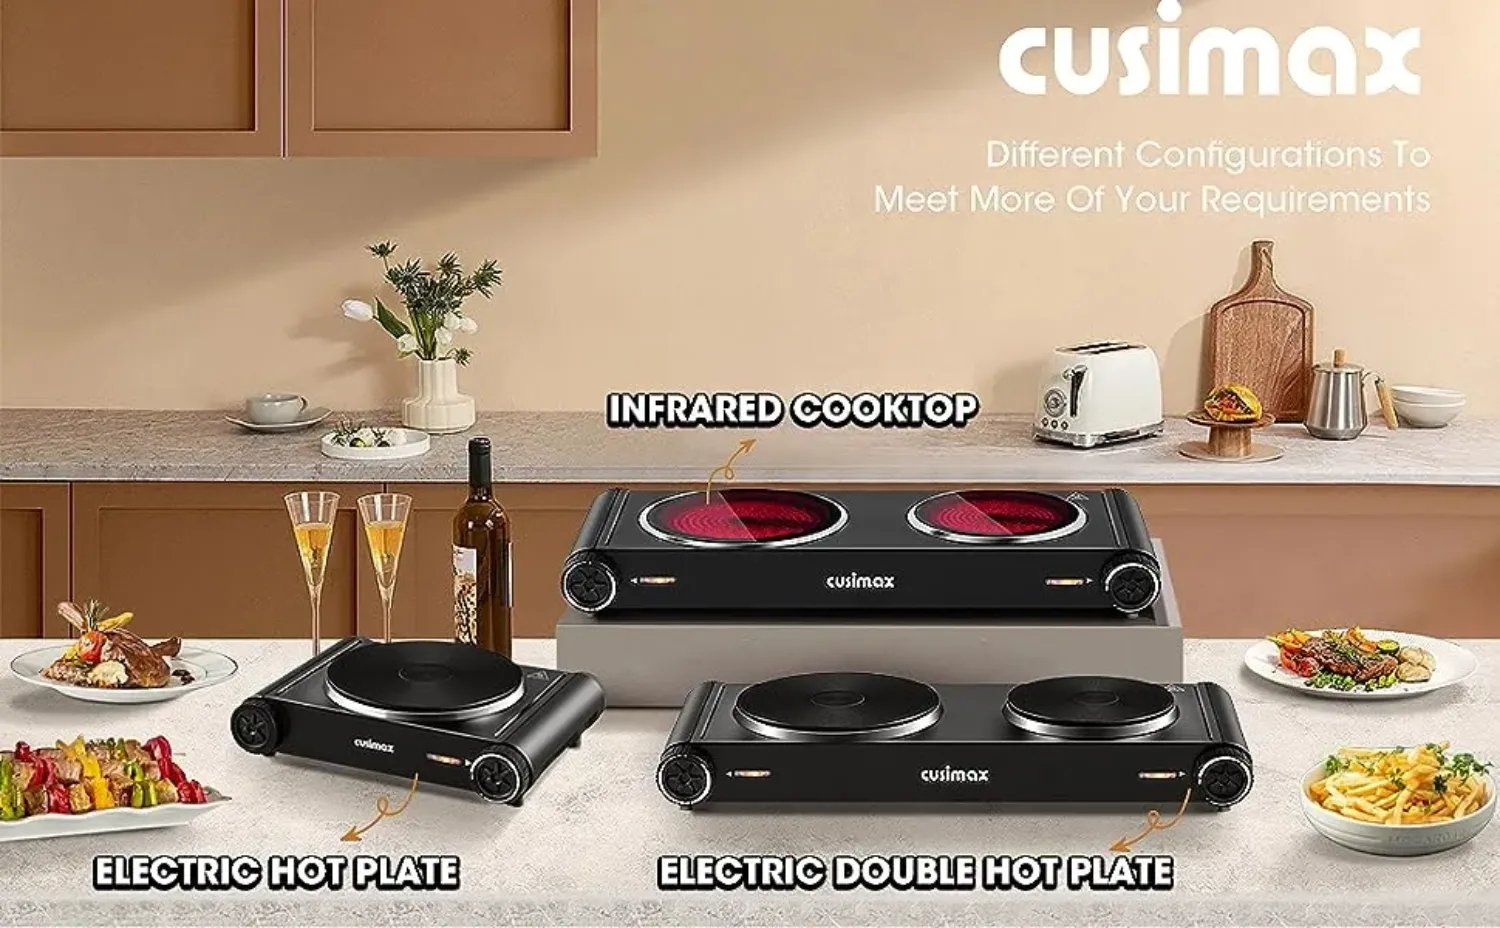 Cusimax 1800W Dual Infrared Cooktop, Portable Electric Stove for Cooki